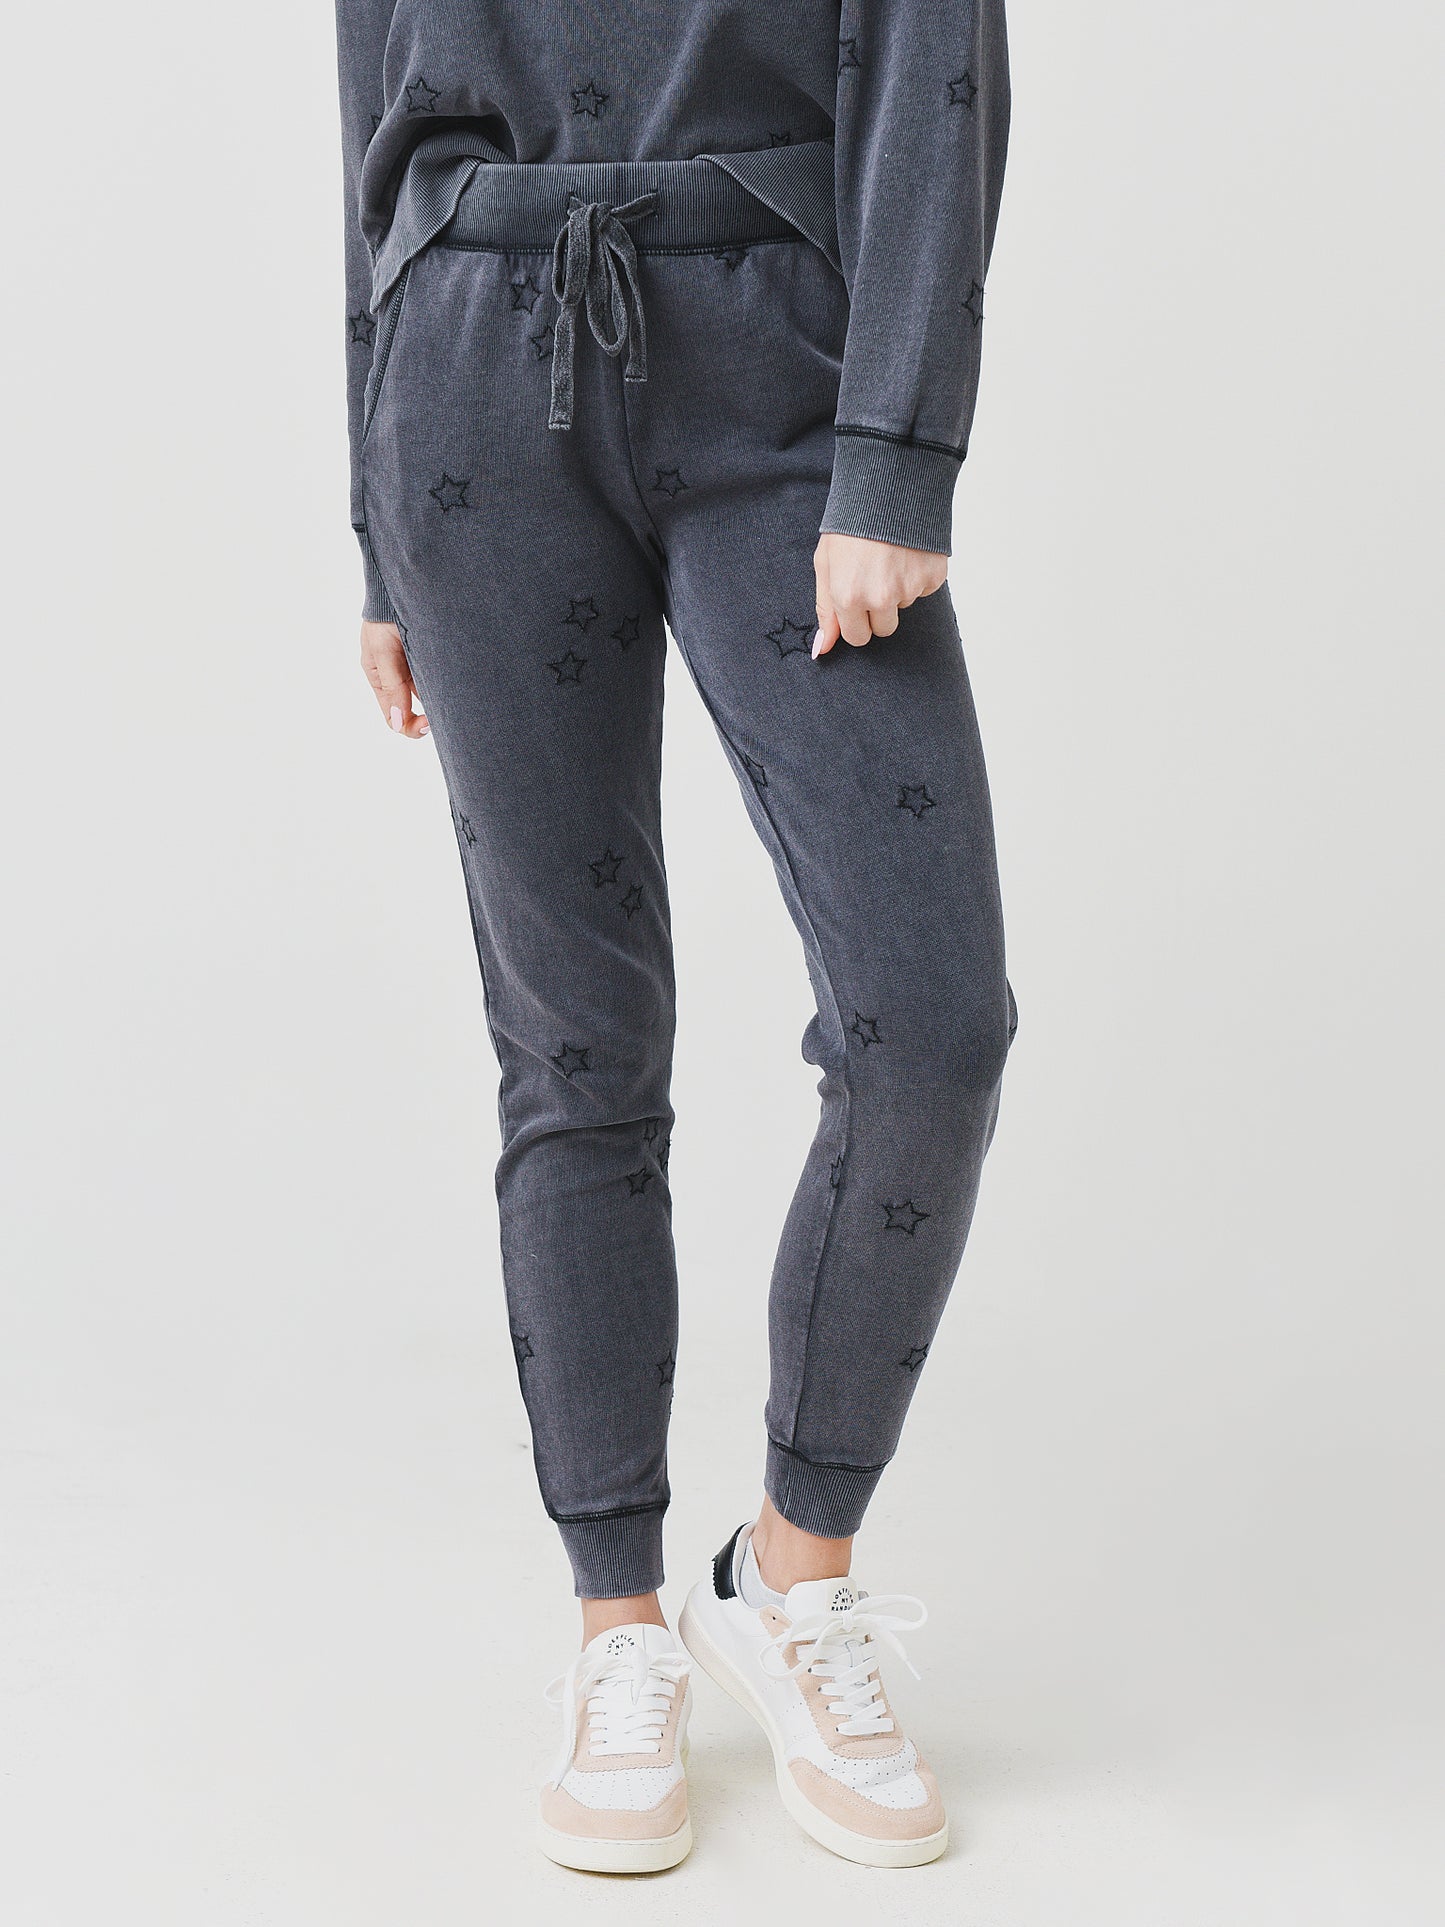 Z Supply Women's Goldie Embroidered Star Jogger